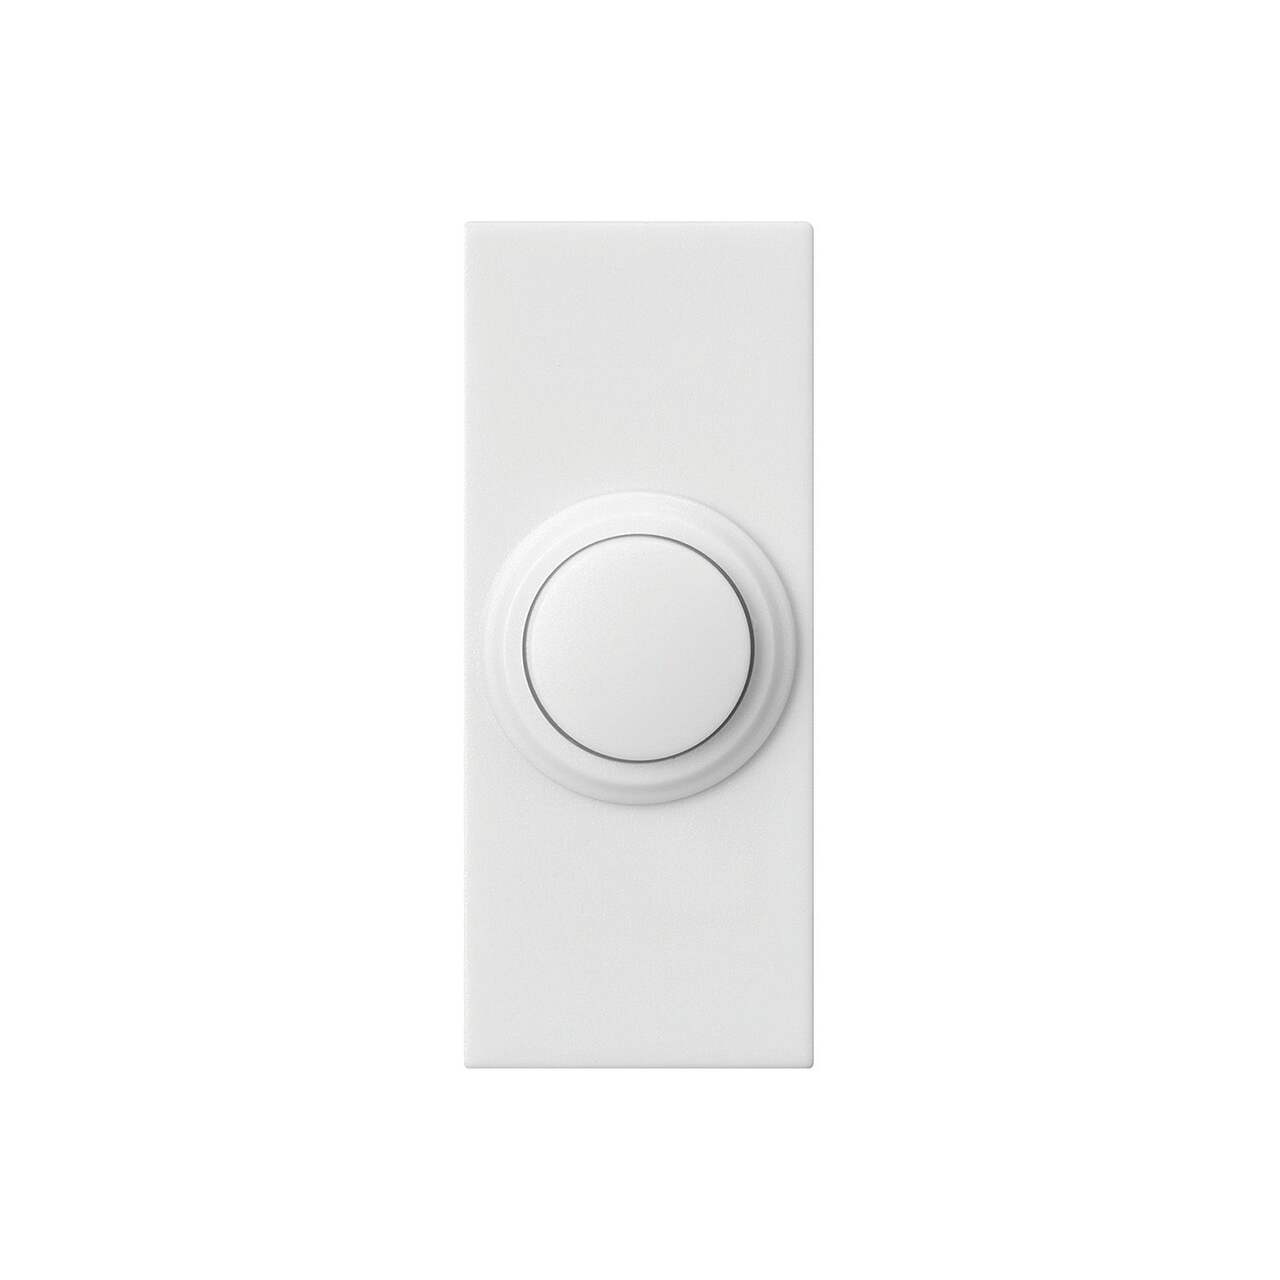 HeathZenith Wireless Battery 150-ft Push Doorbell Chime Button, White